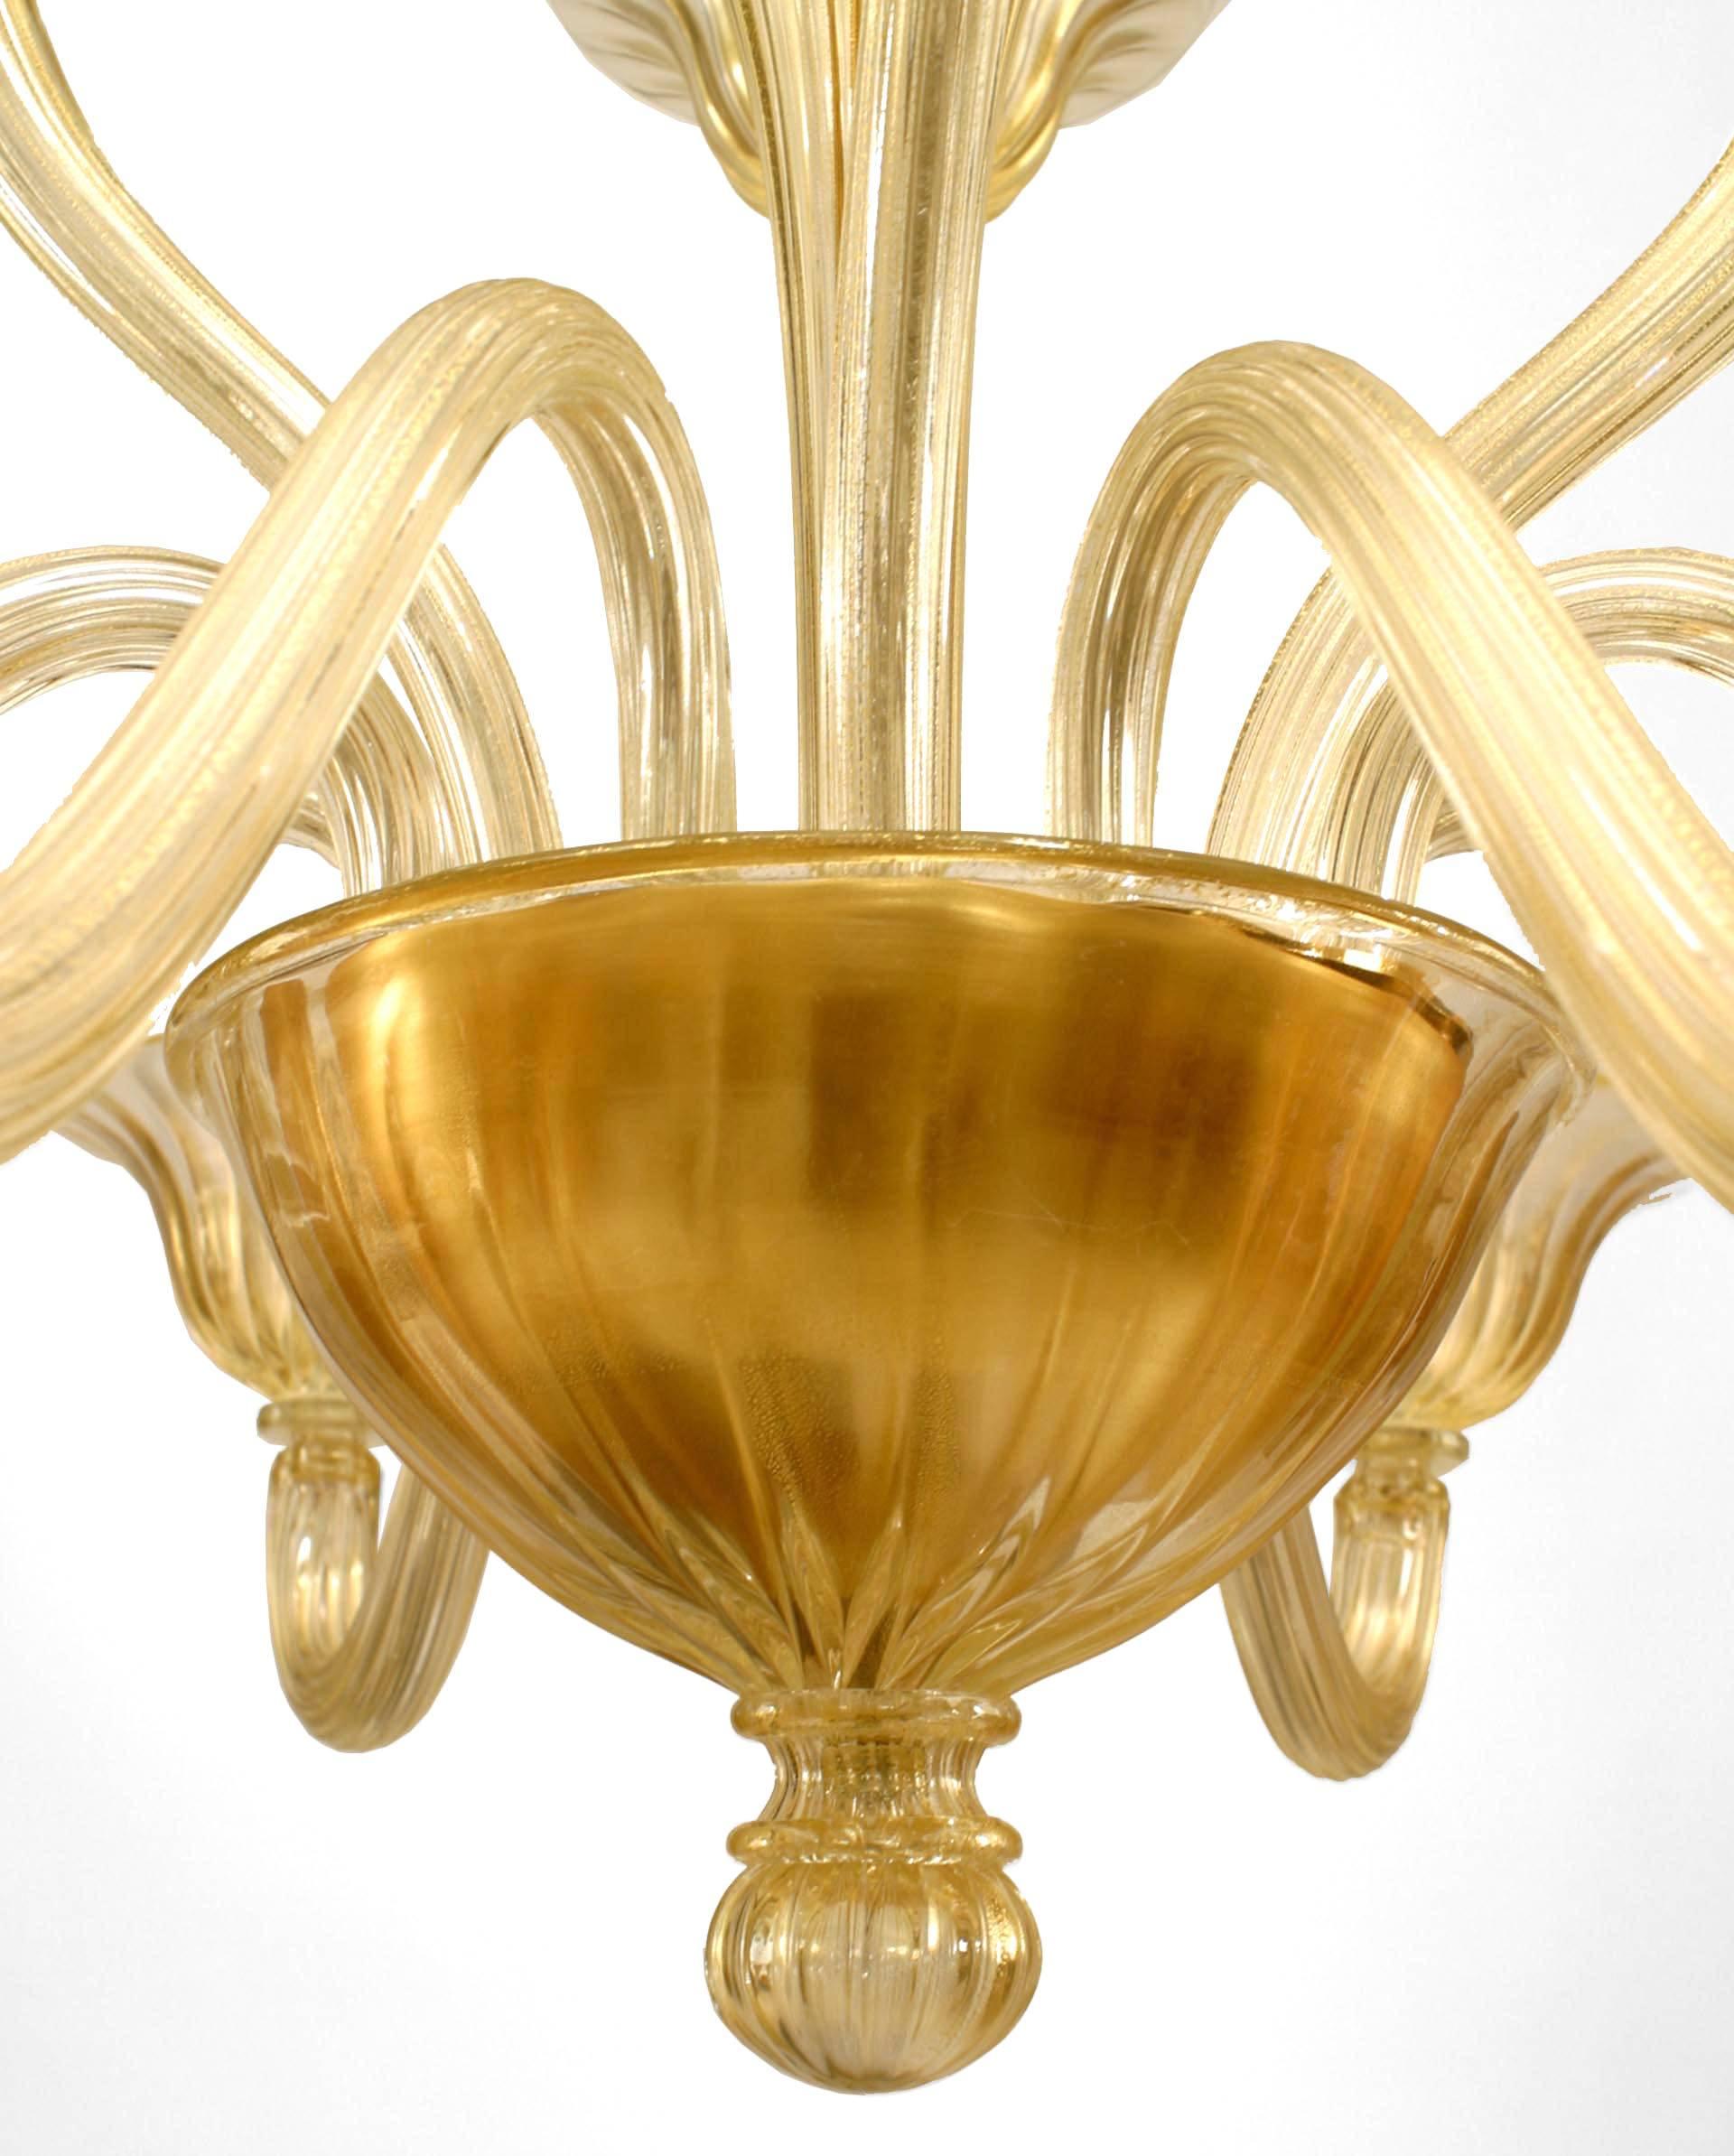 20th Century 2 Italian Murano Sommerso Gold Dusted Glass Chandeliers For Sale